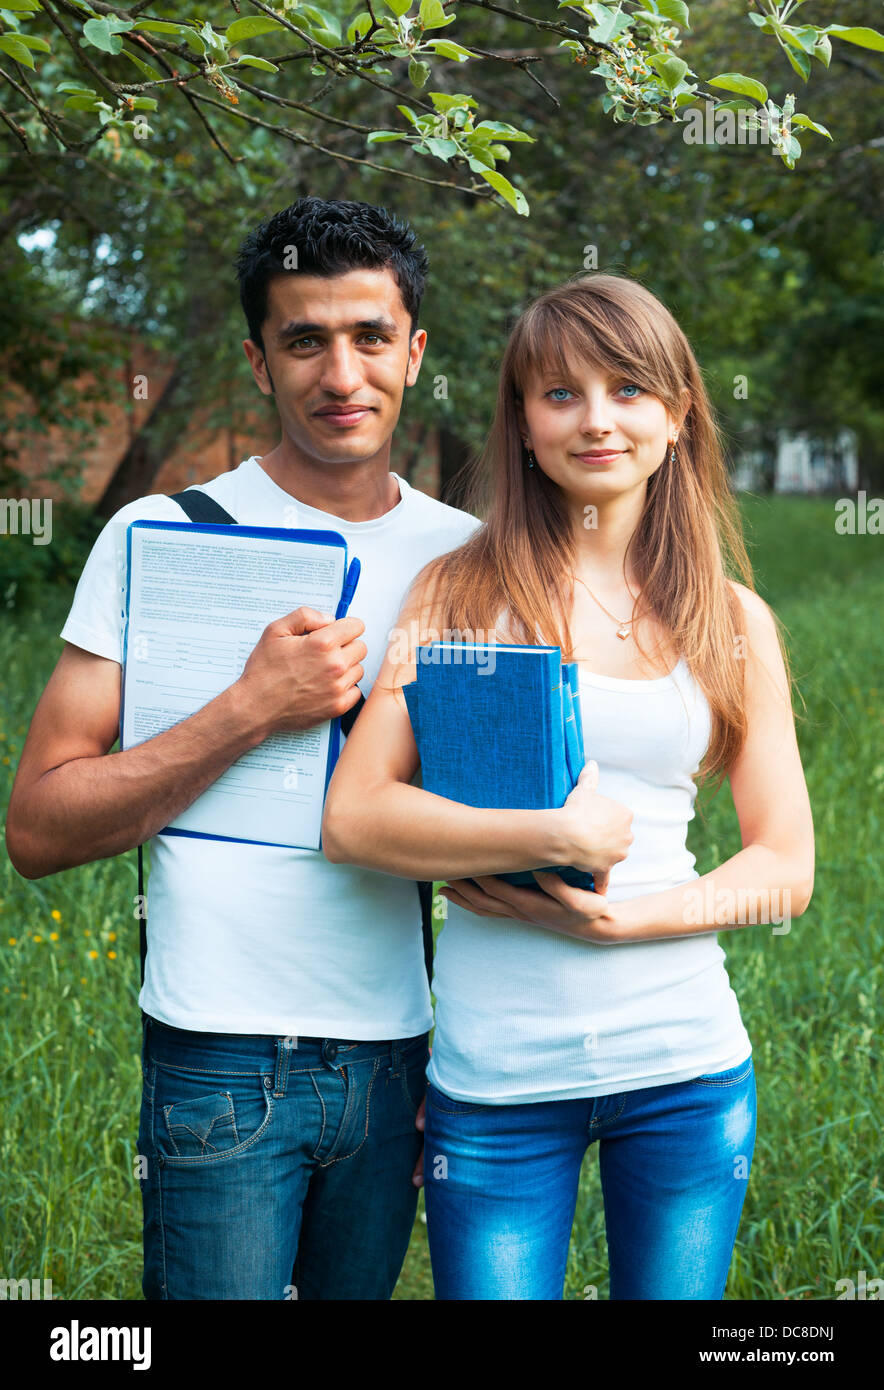 Two students guy and girl studying in park with book outdoors Stock Photo